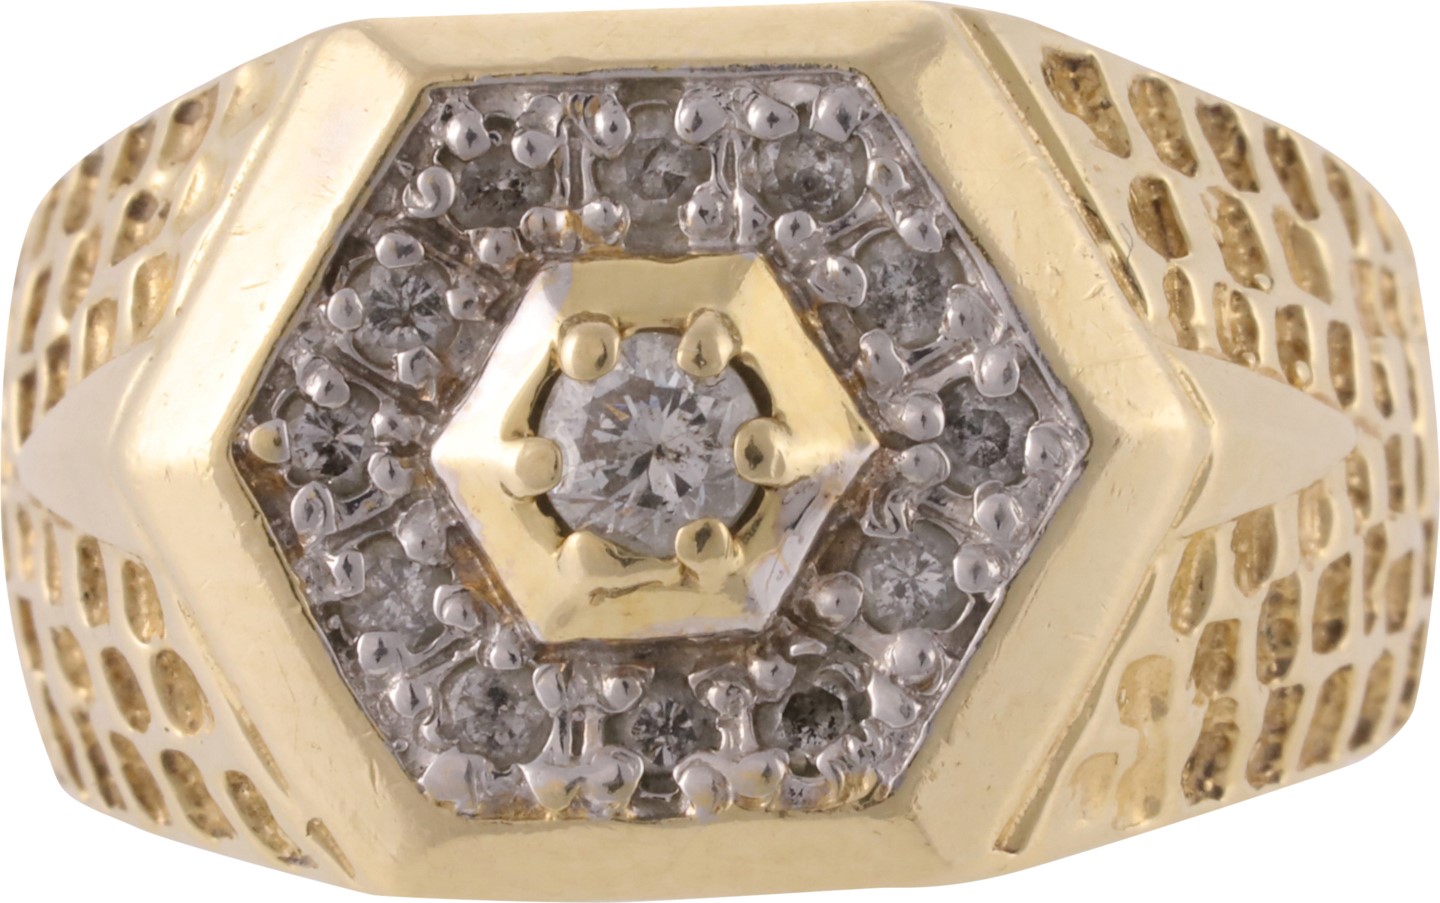 - Errol Flynn Personally Owned 14k Gold Ring with Twelve Diamonds